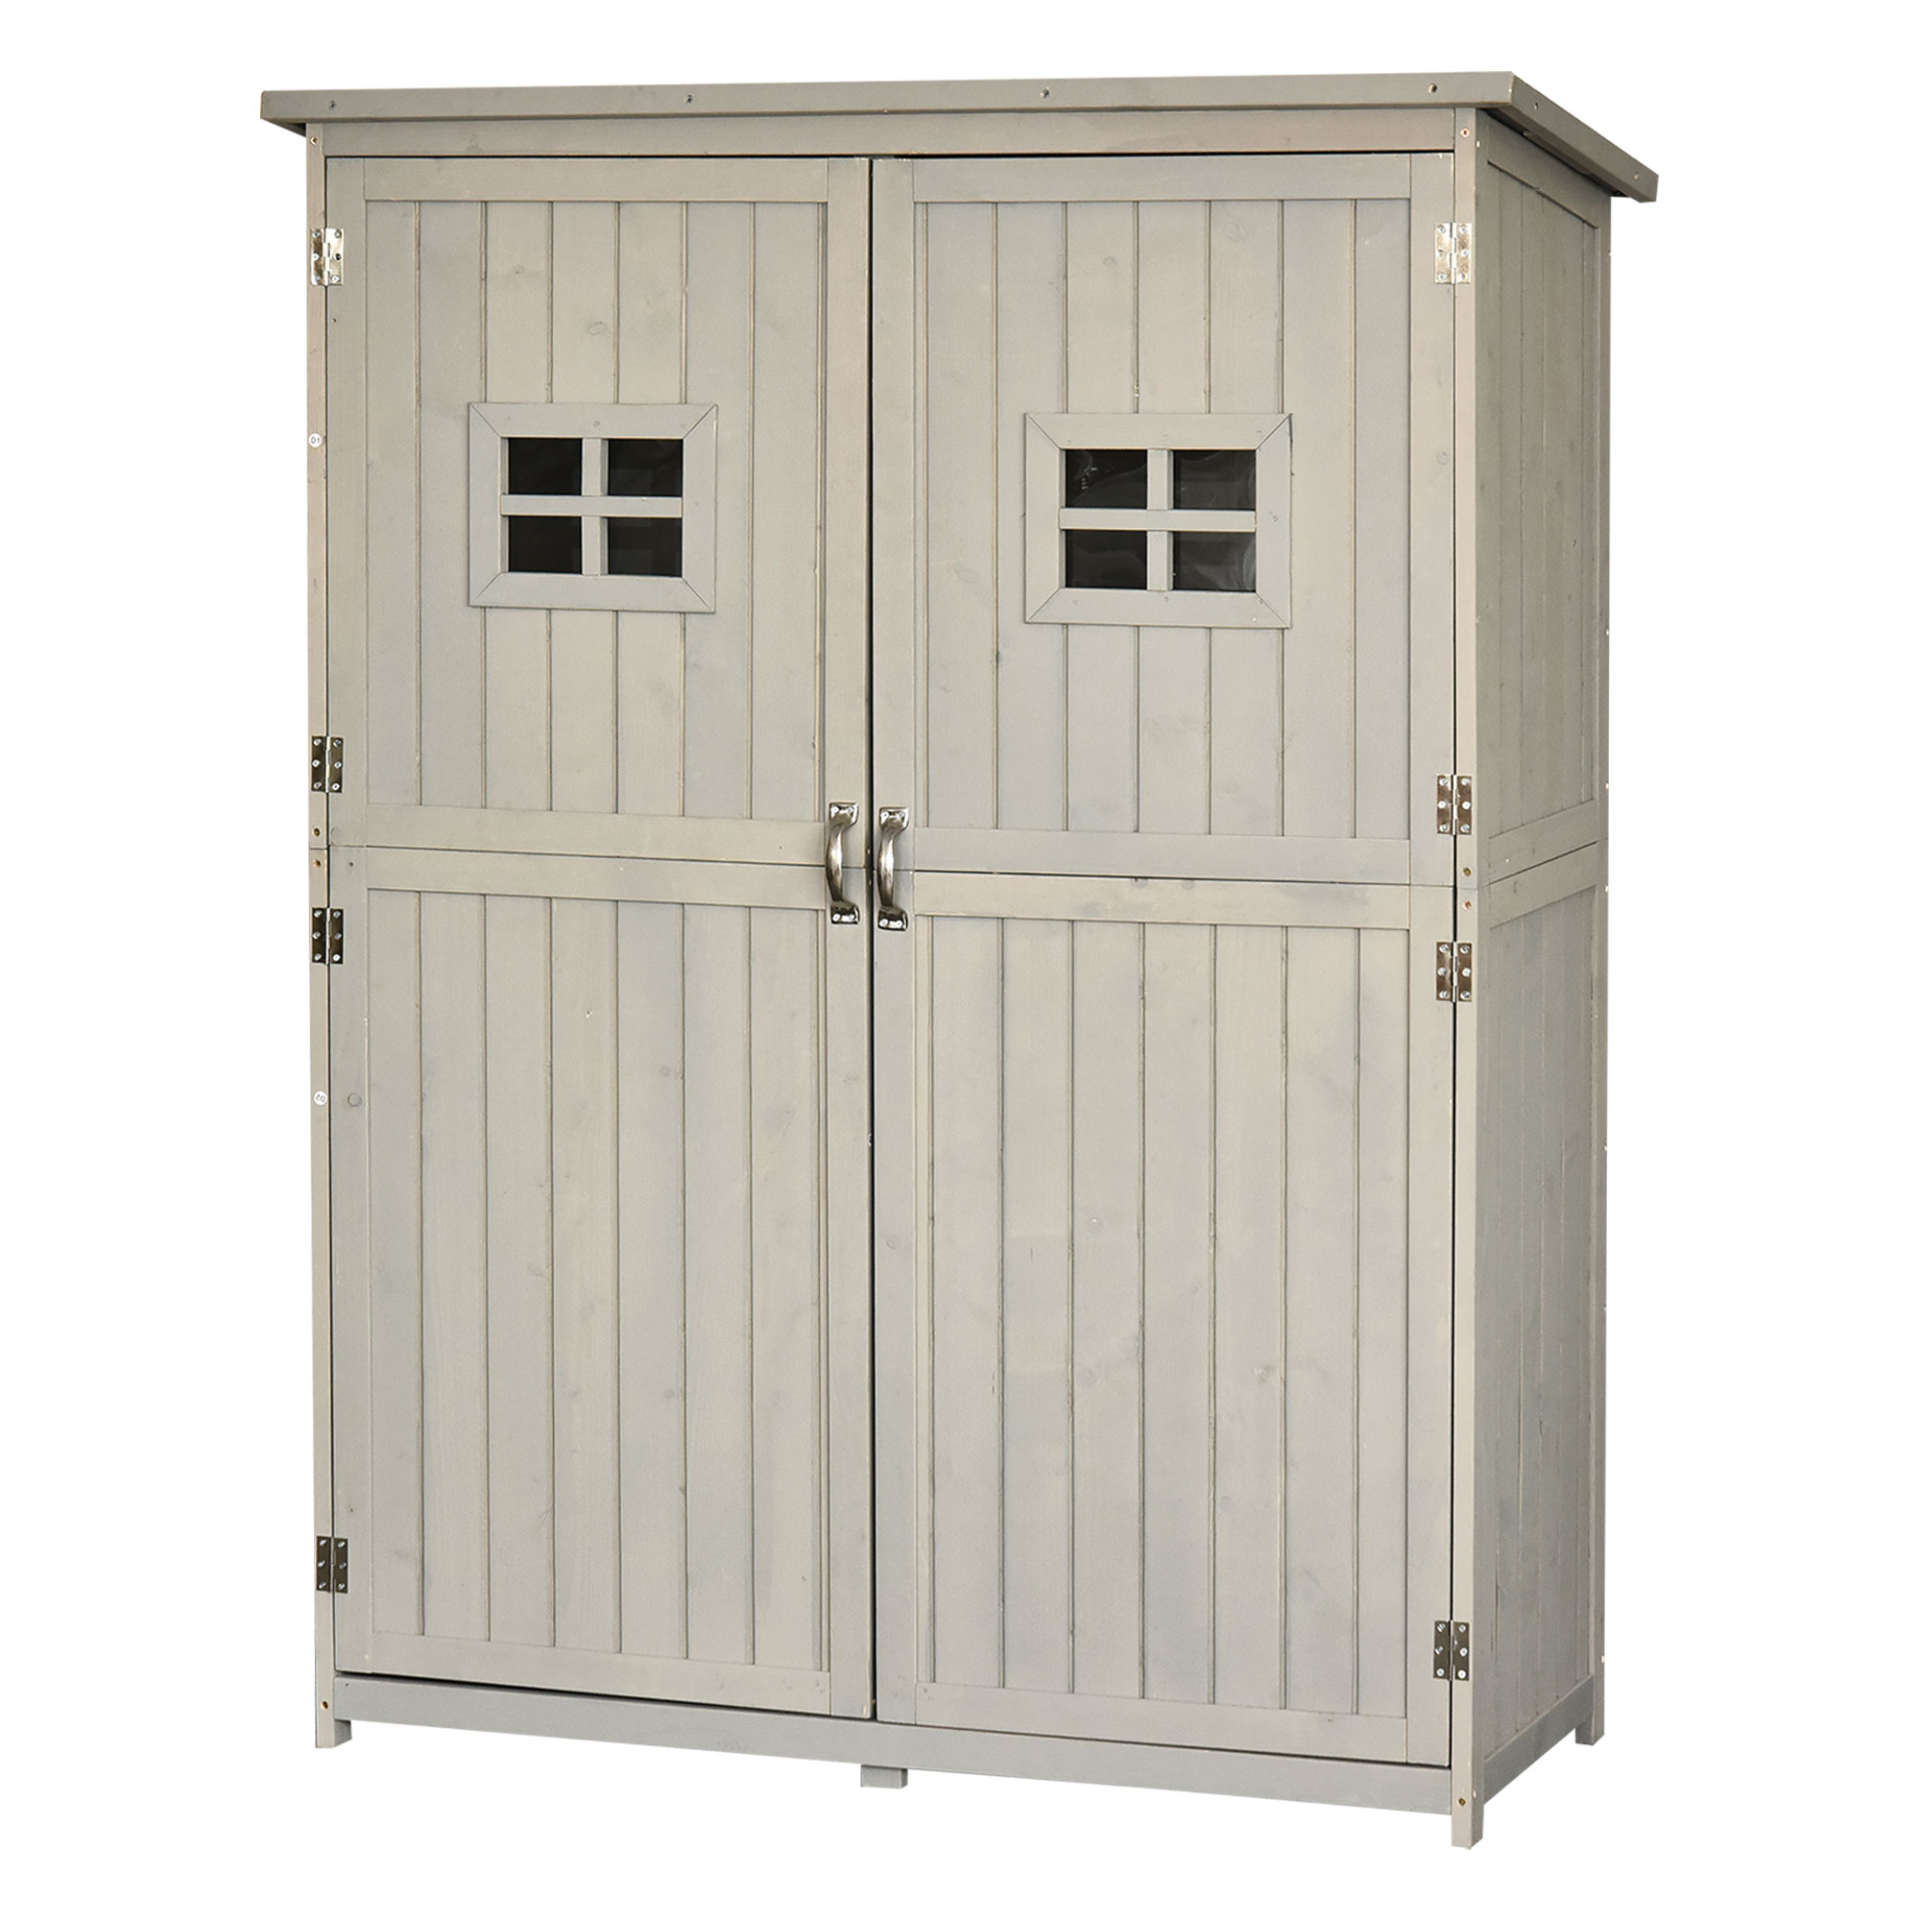 Outsunny Wooden Garden Shed Tool Storage Outsunny Wooden Garden Shed w/ Two Wind